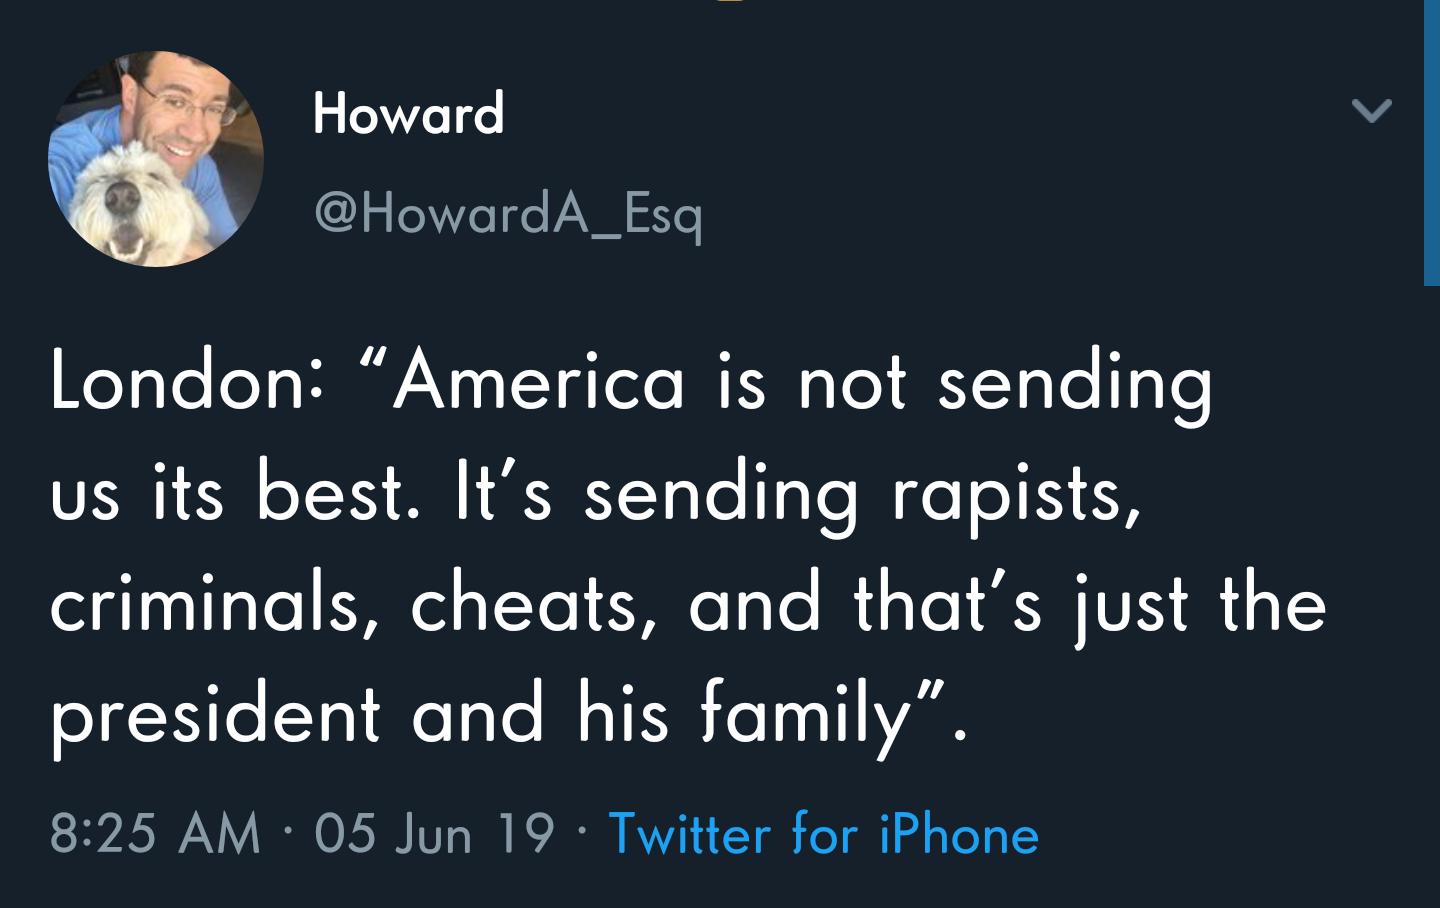 sky - Howard London America is not sending us its best. It's sending rapists, criminals, cheats, and that's just the president and his family. 05 Jun 19 Twitter for iPhone